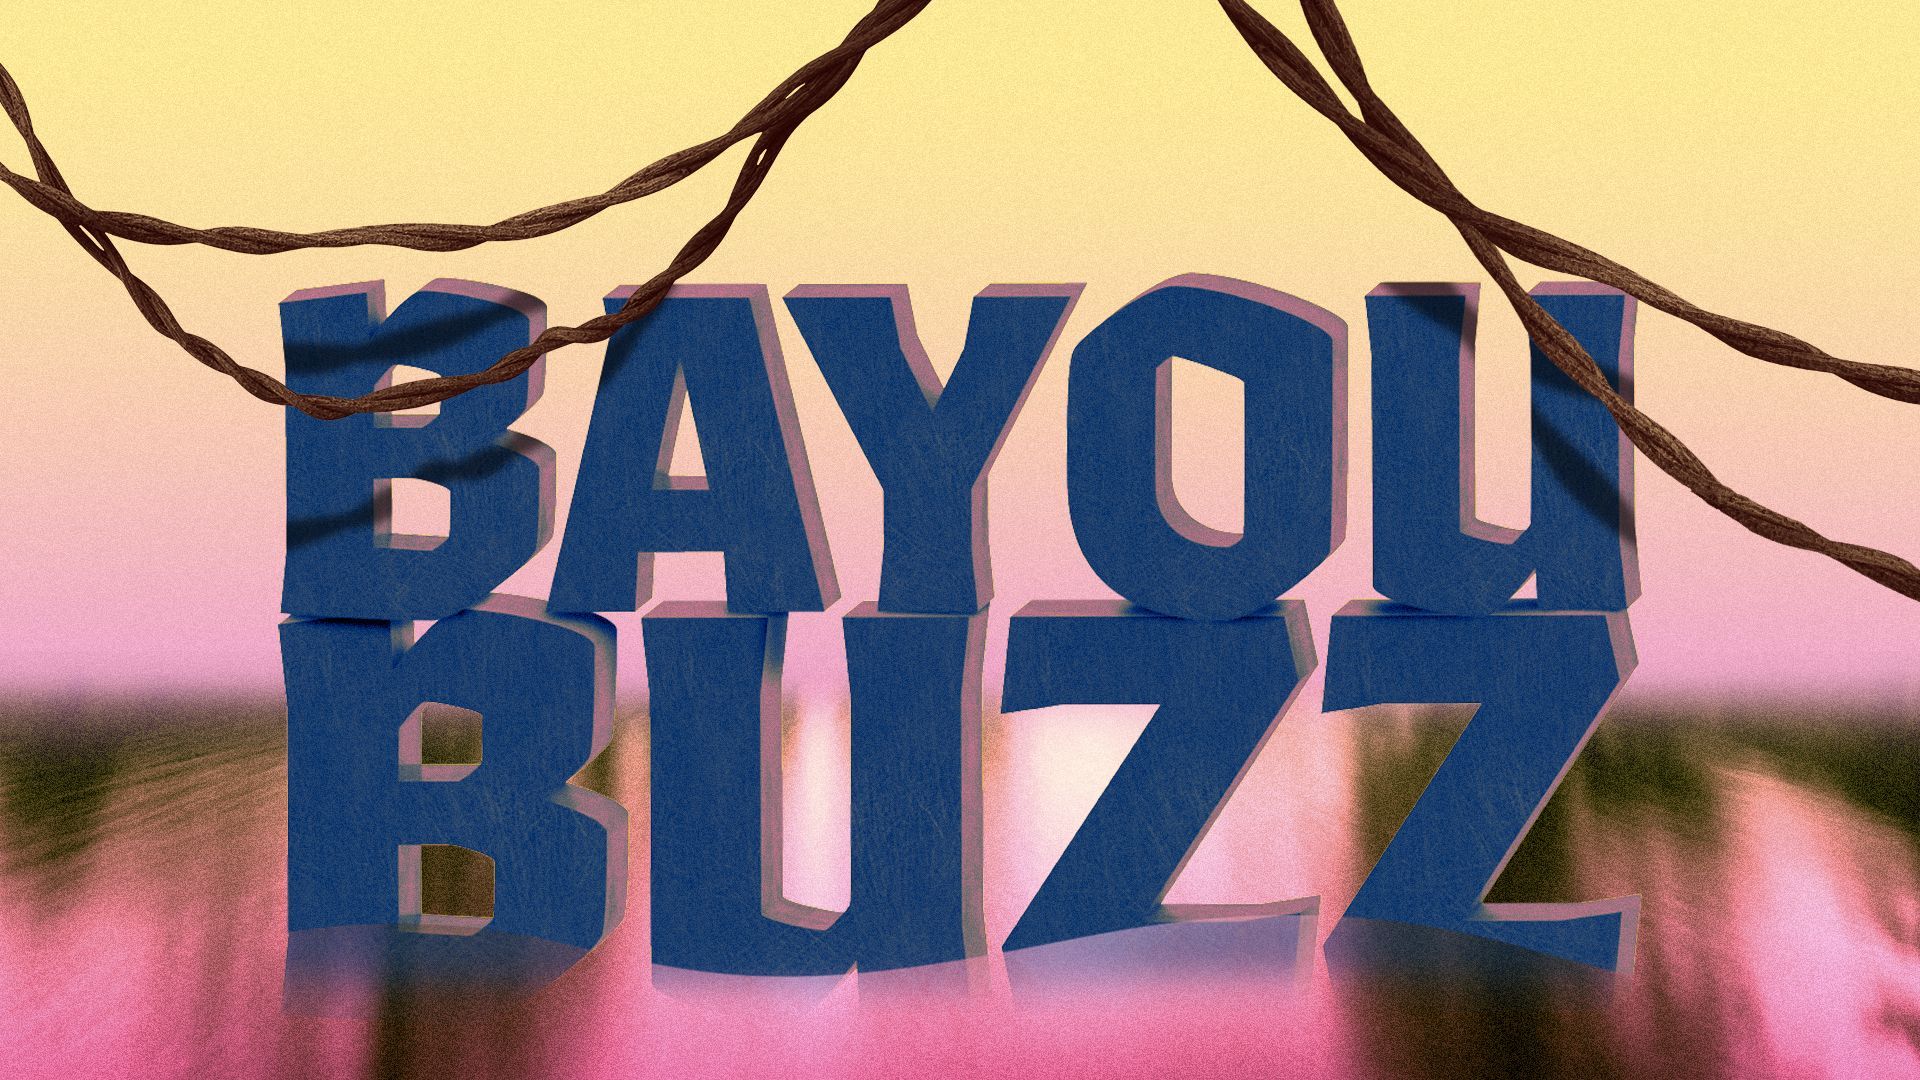 Illustration of "Bayou Buzz" 3D text surrounded by water and vines.